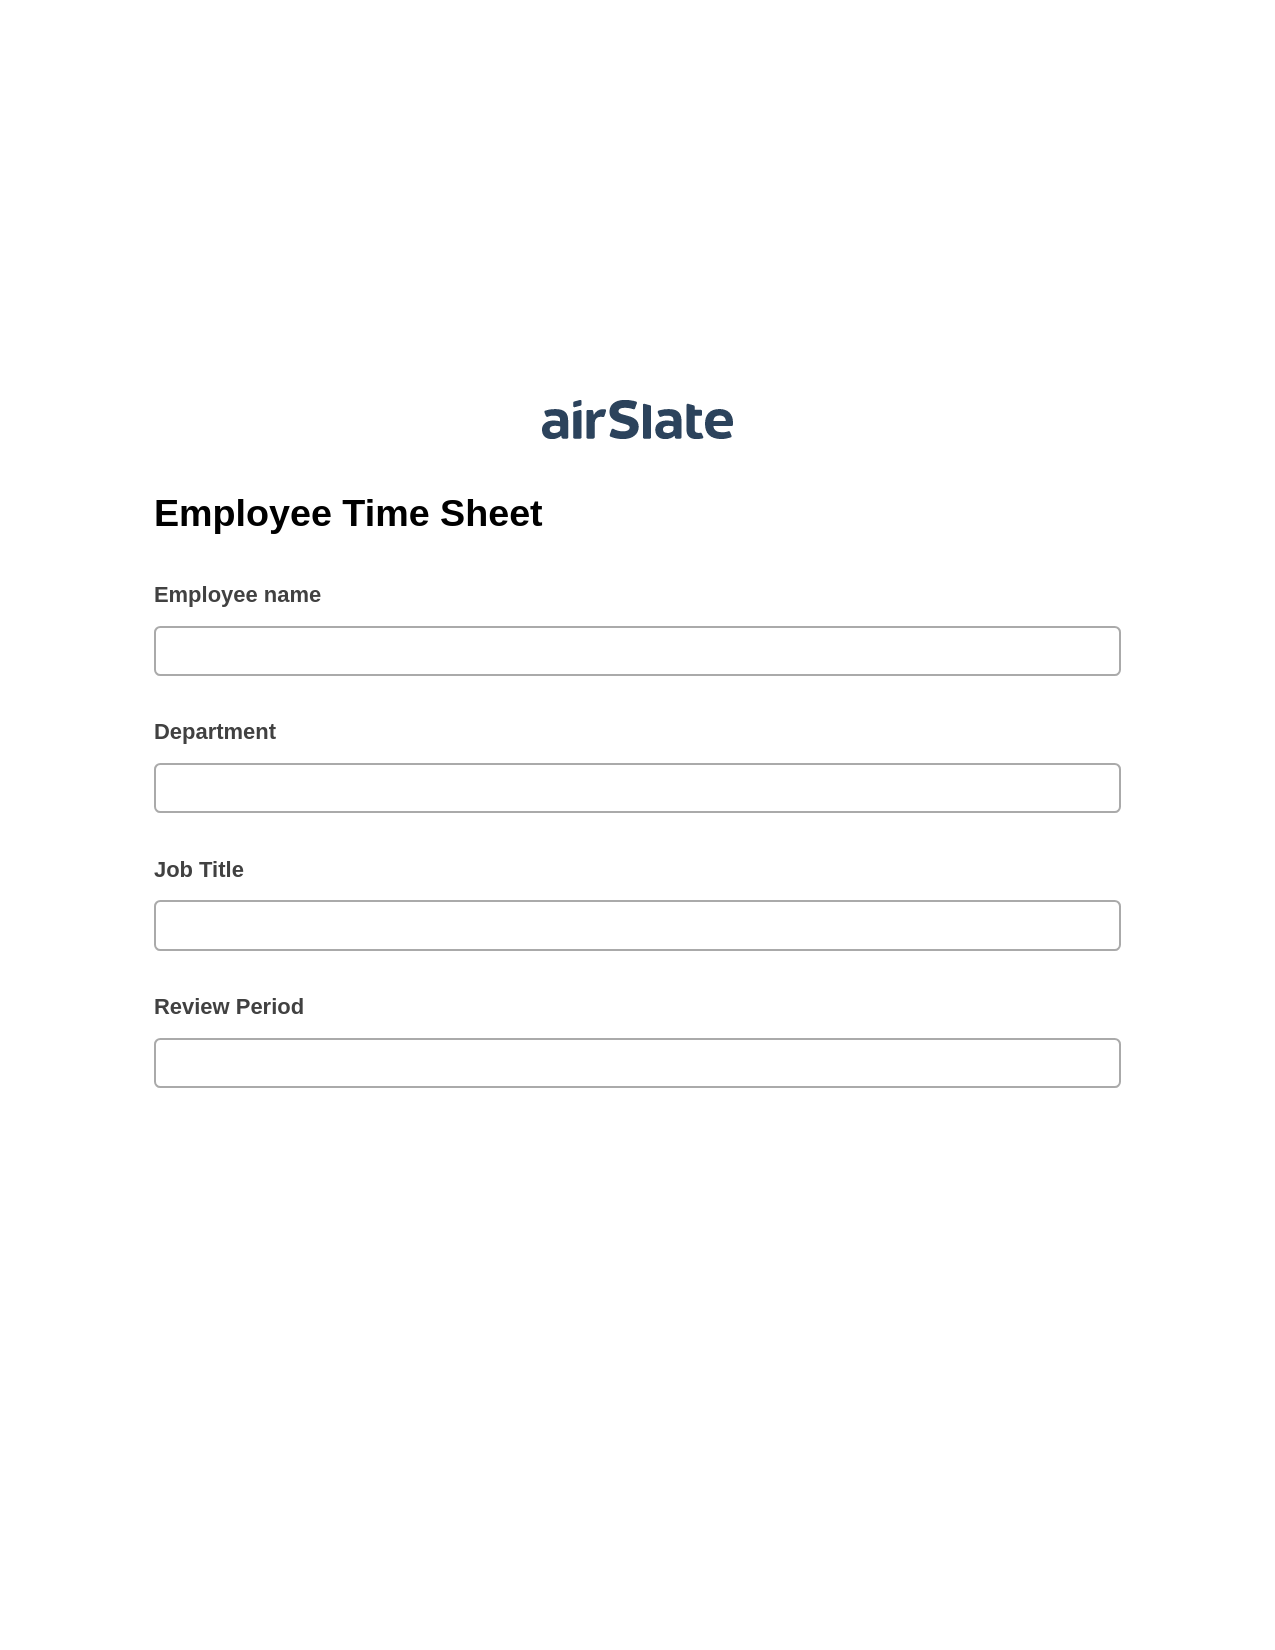 Employee Time Sheet Pre-fill from Salesforce Records Bot, SendGrid send Campaign bot, Export to WebMerge Bot